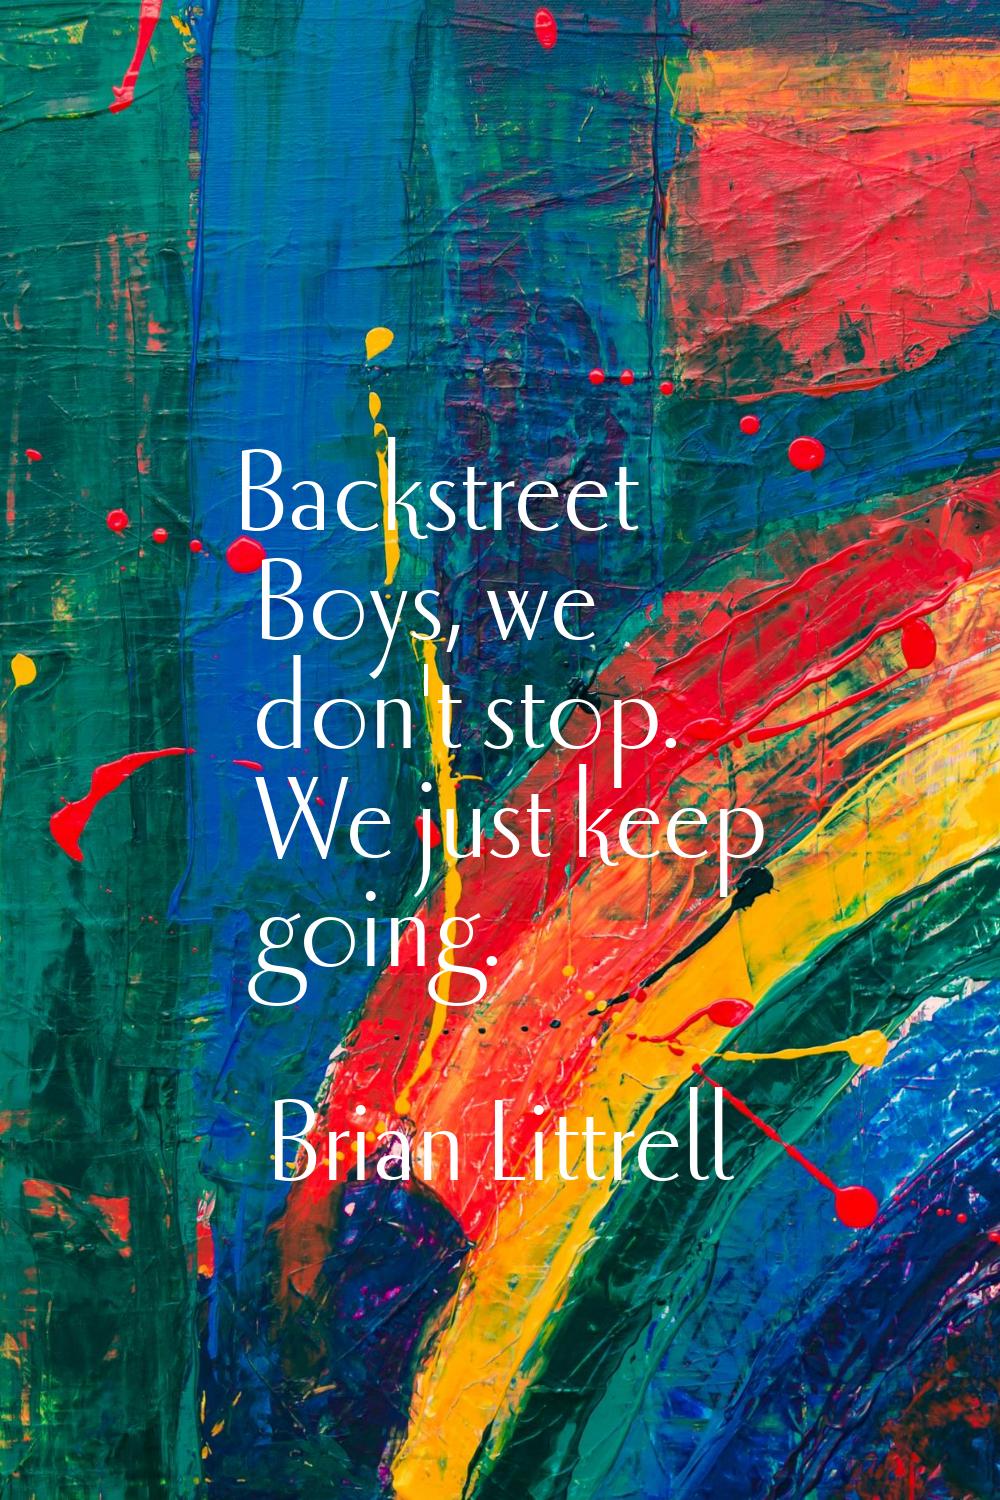 Backstreet Boys, we don't stop. We just keep going.